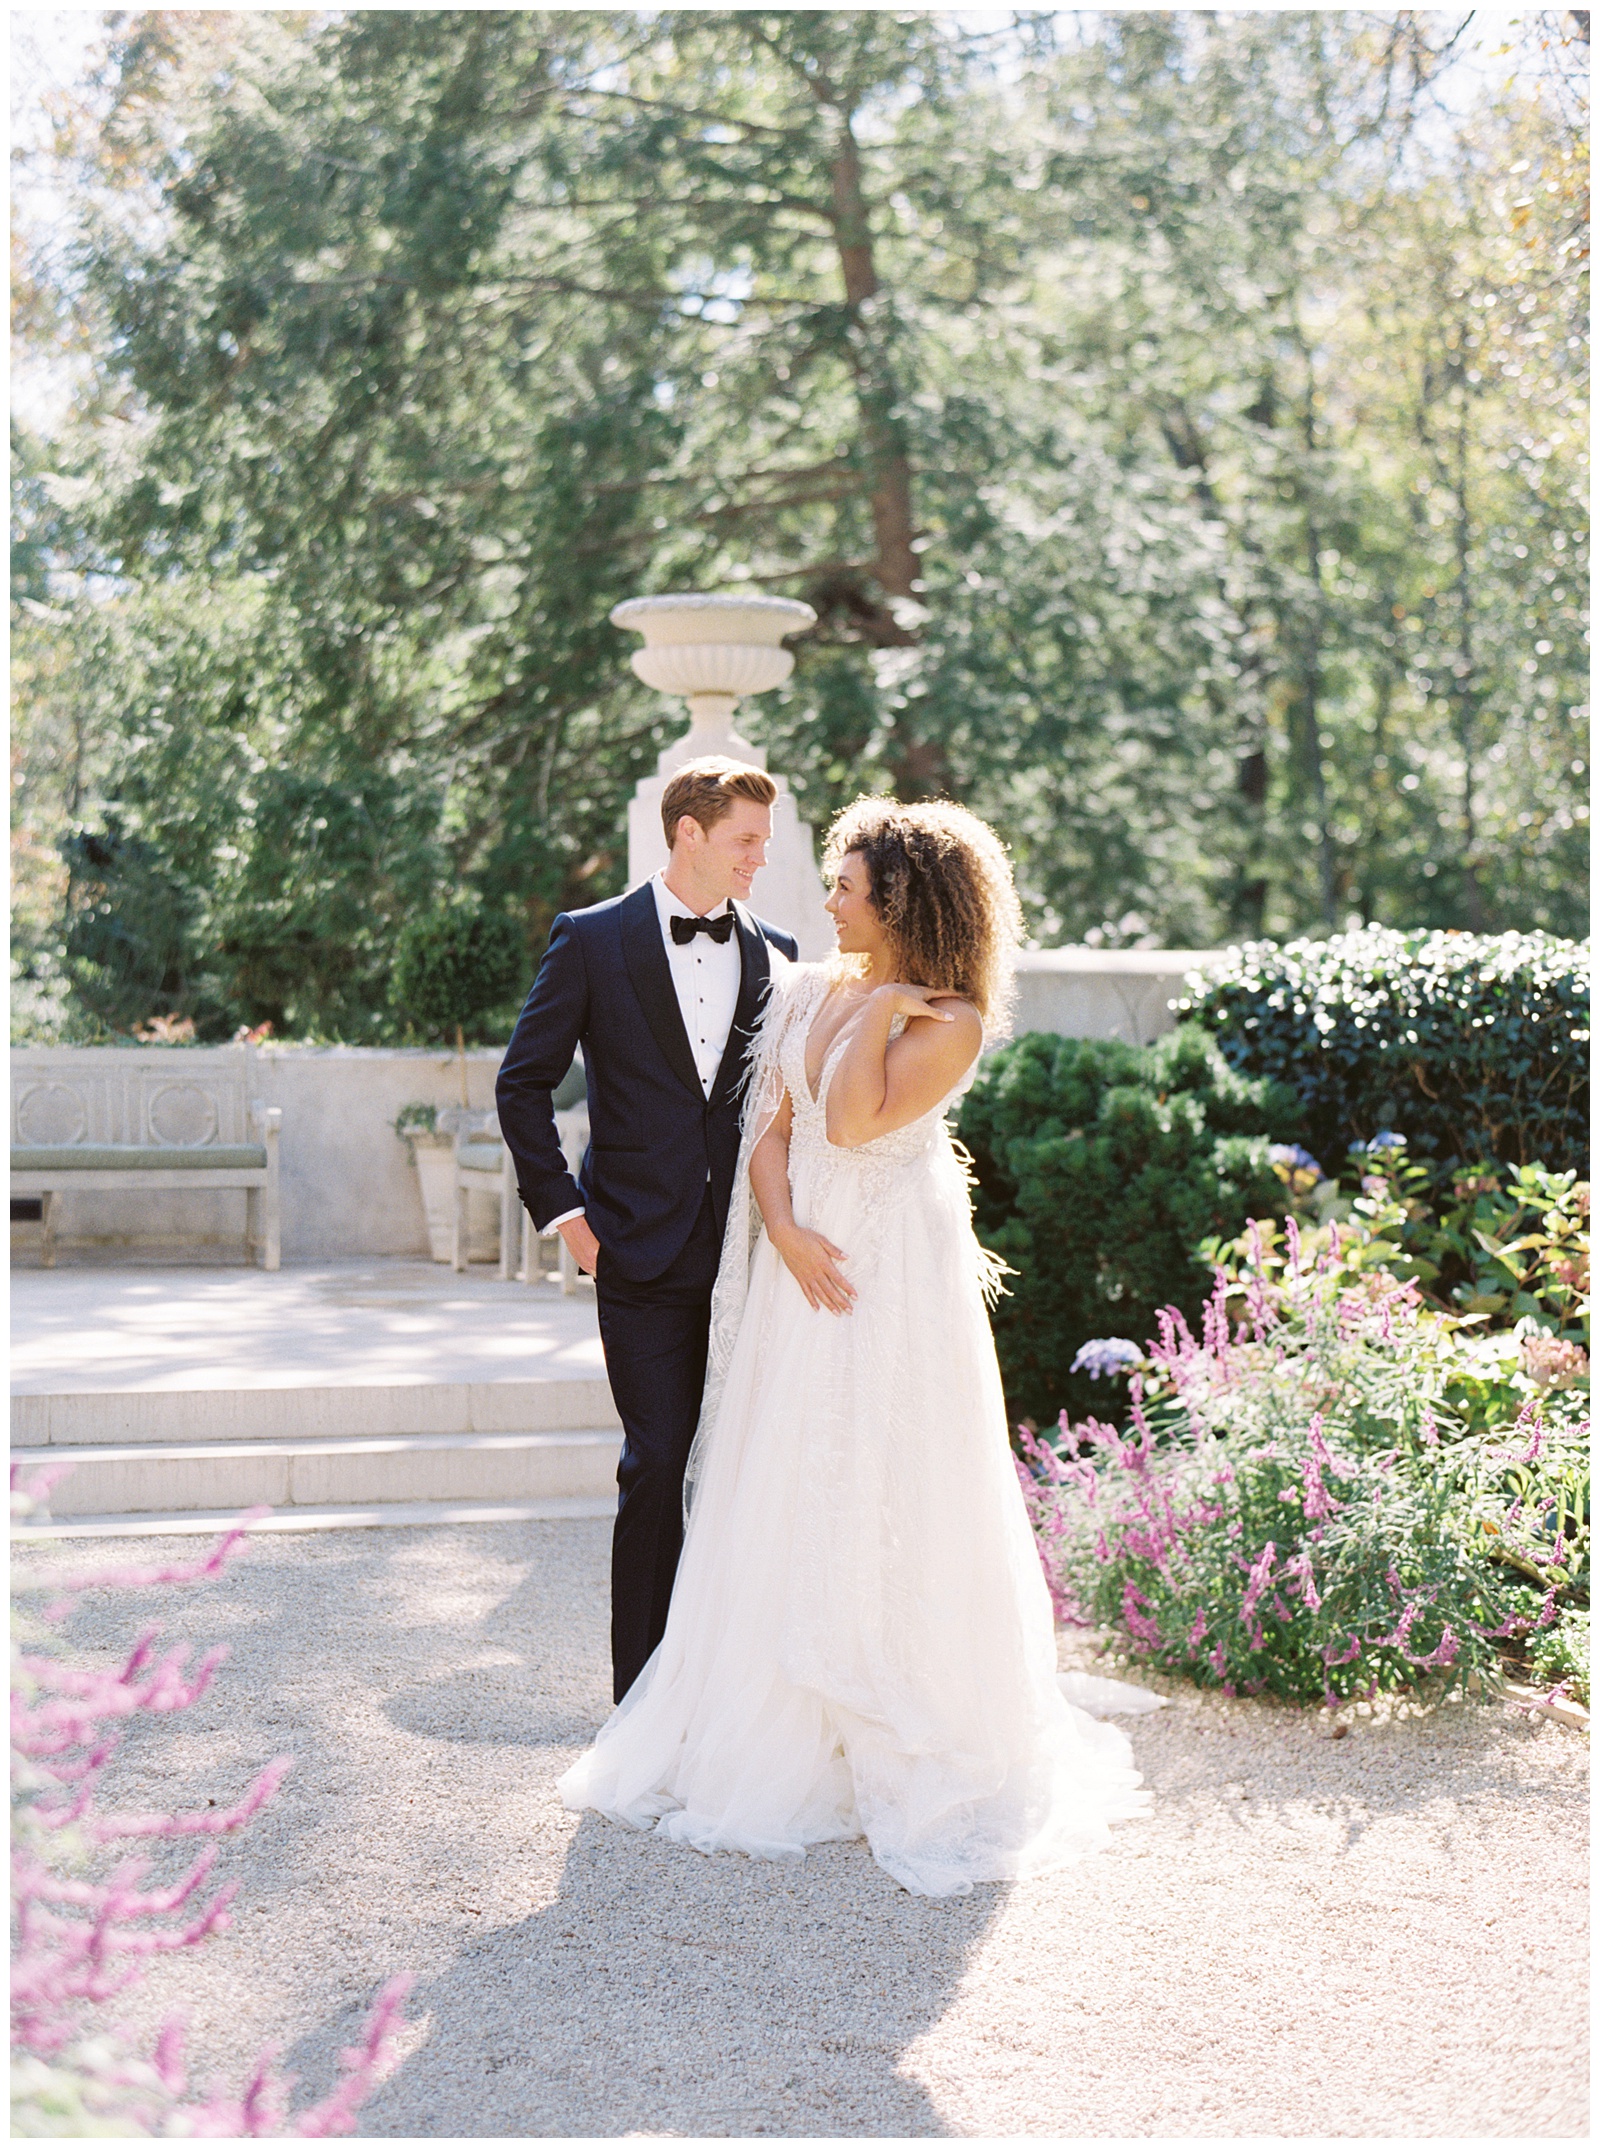 Romantic Bride and Groom Portrait at Atlanta Swan House Wedding with Sarah Sunstrom Photography